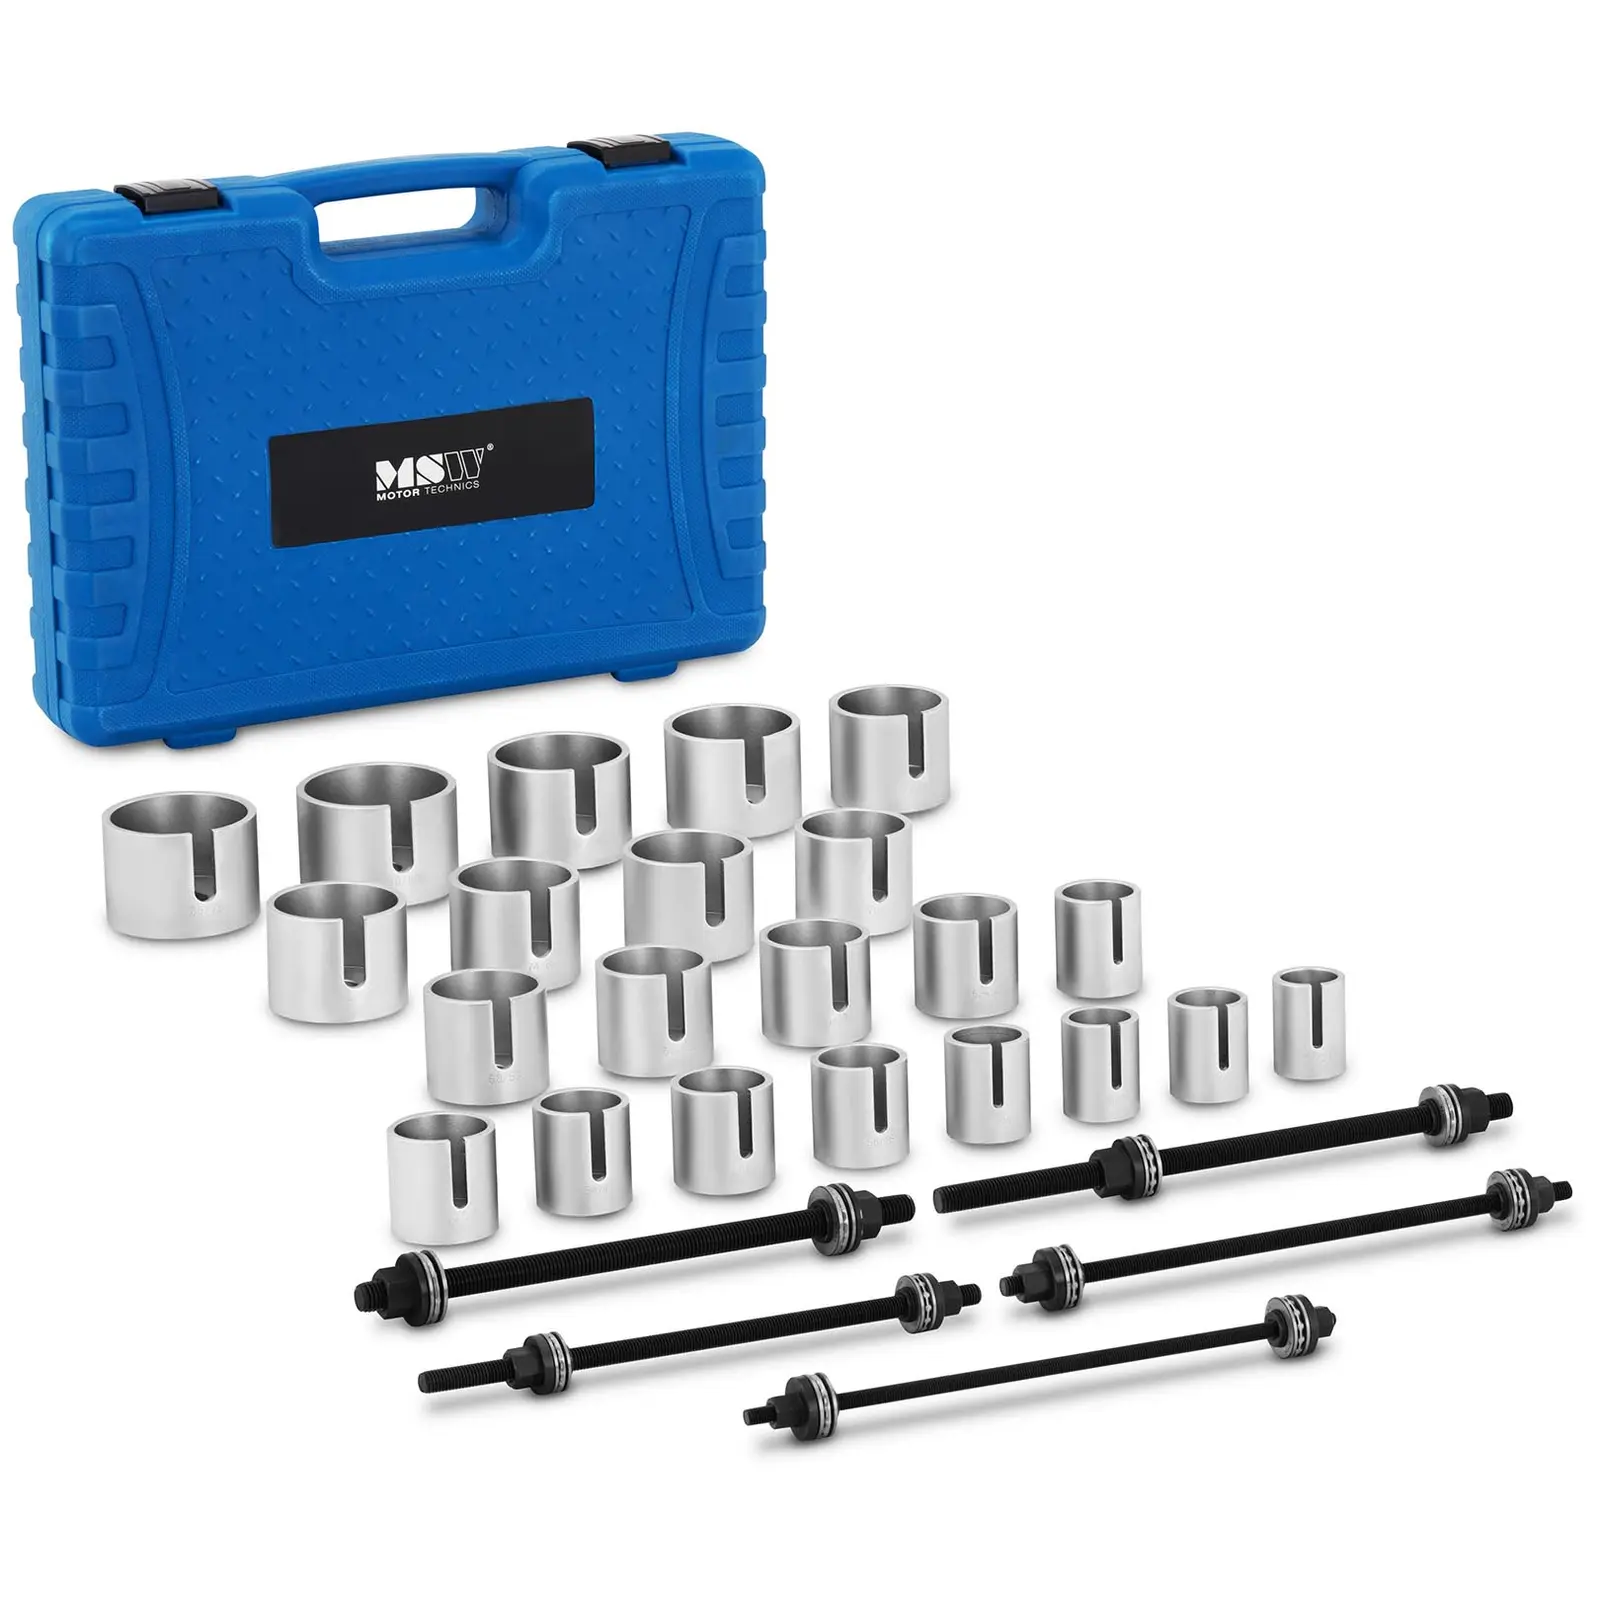 Press and Pull Sleeve Kit for Wheel Bearings and Rubber Bushings - universal